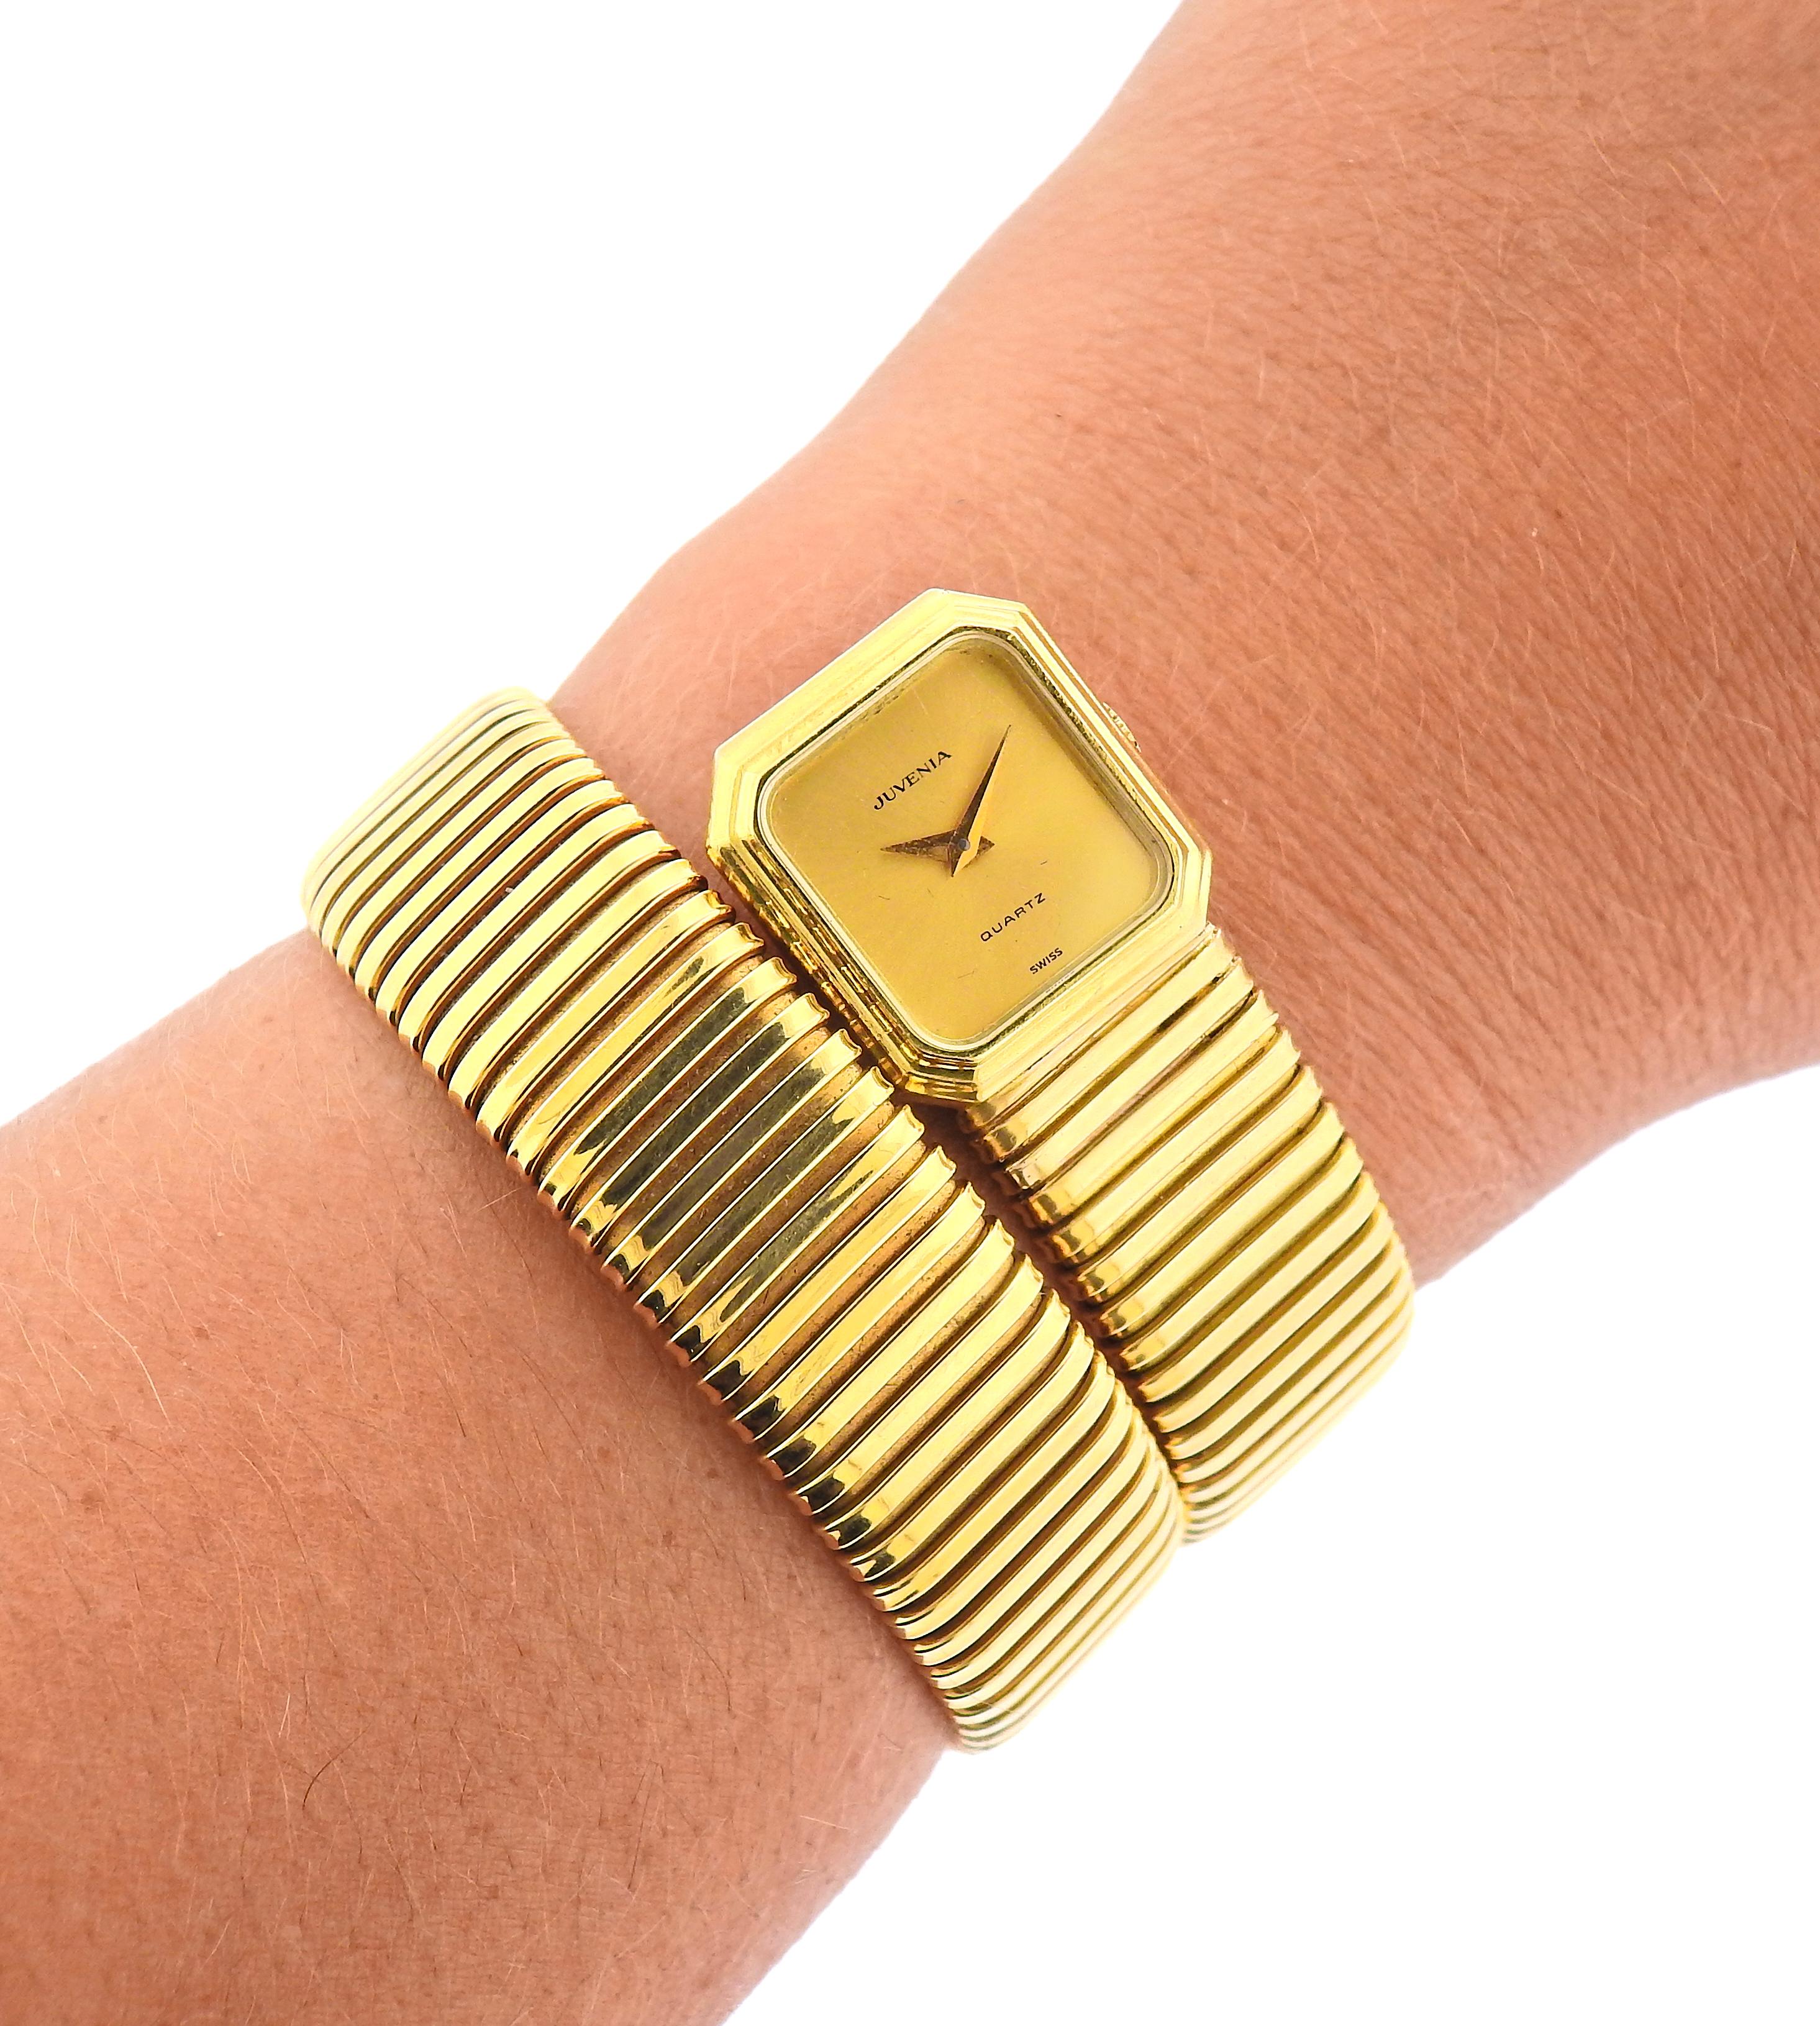 Marina B Gold Bracelet Juvenia Watch In Excellent Condition For Sale In New York, NY